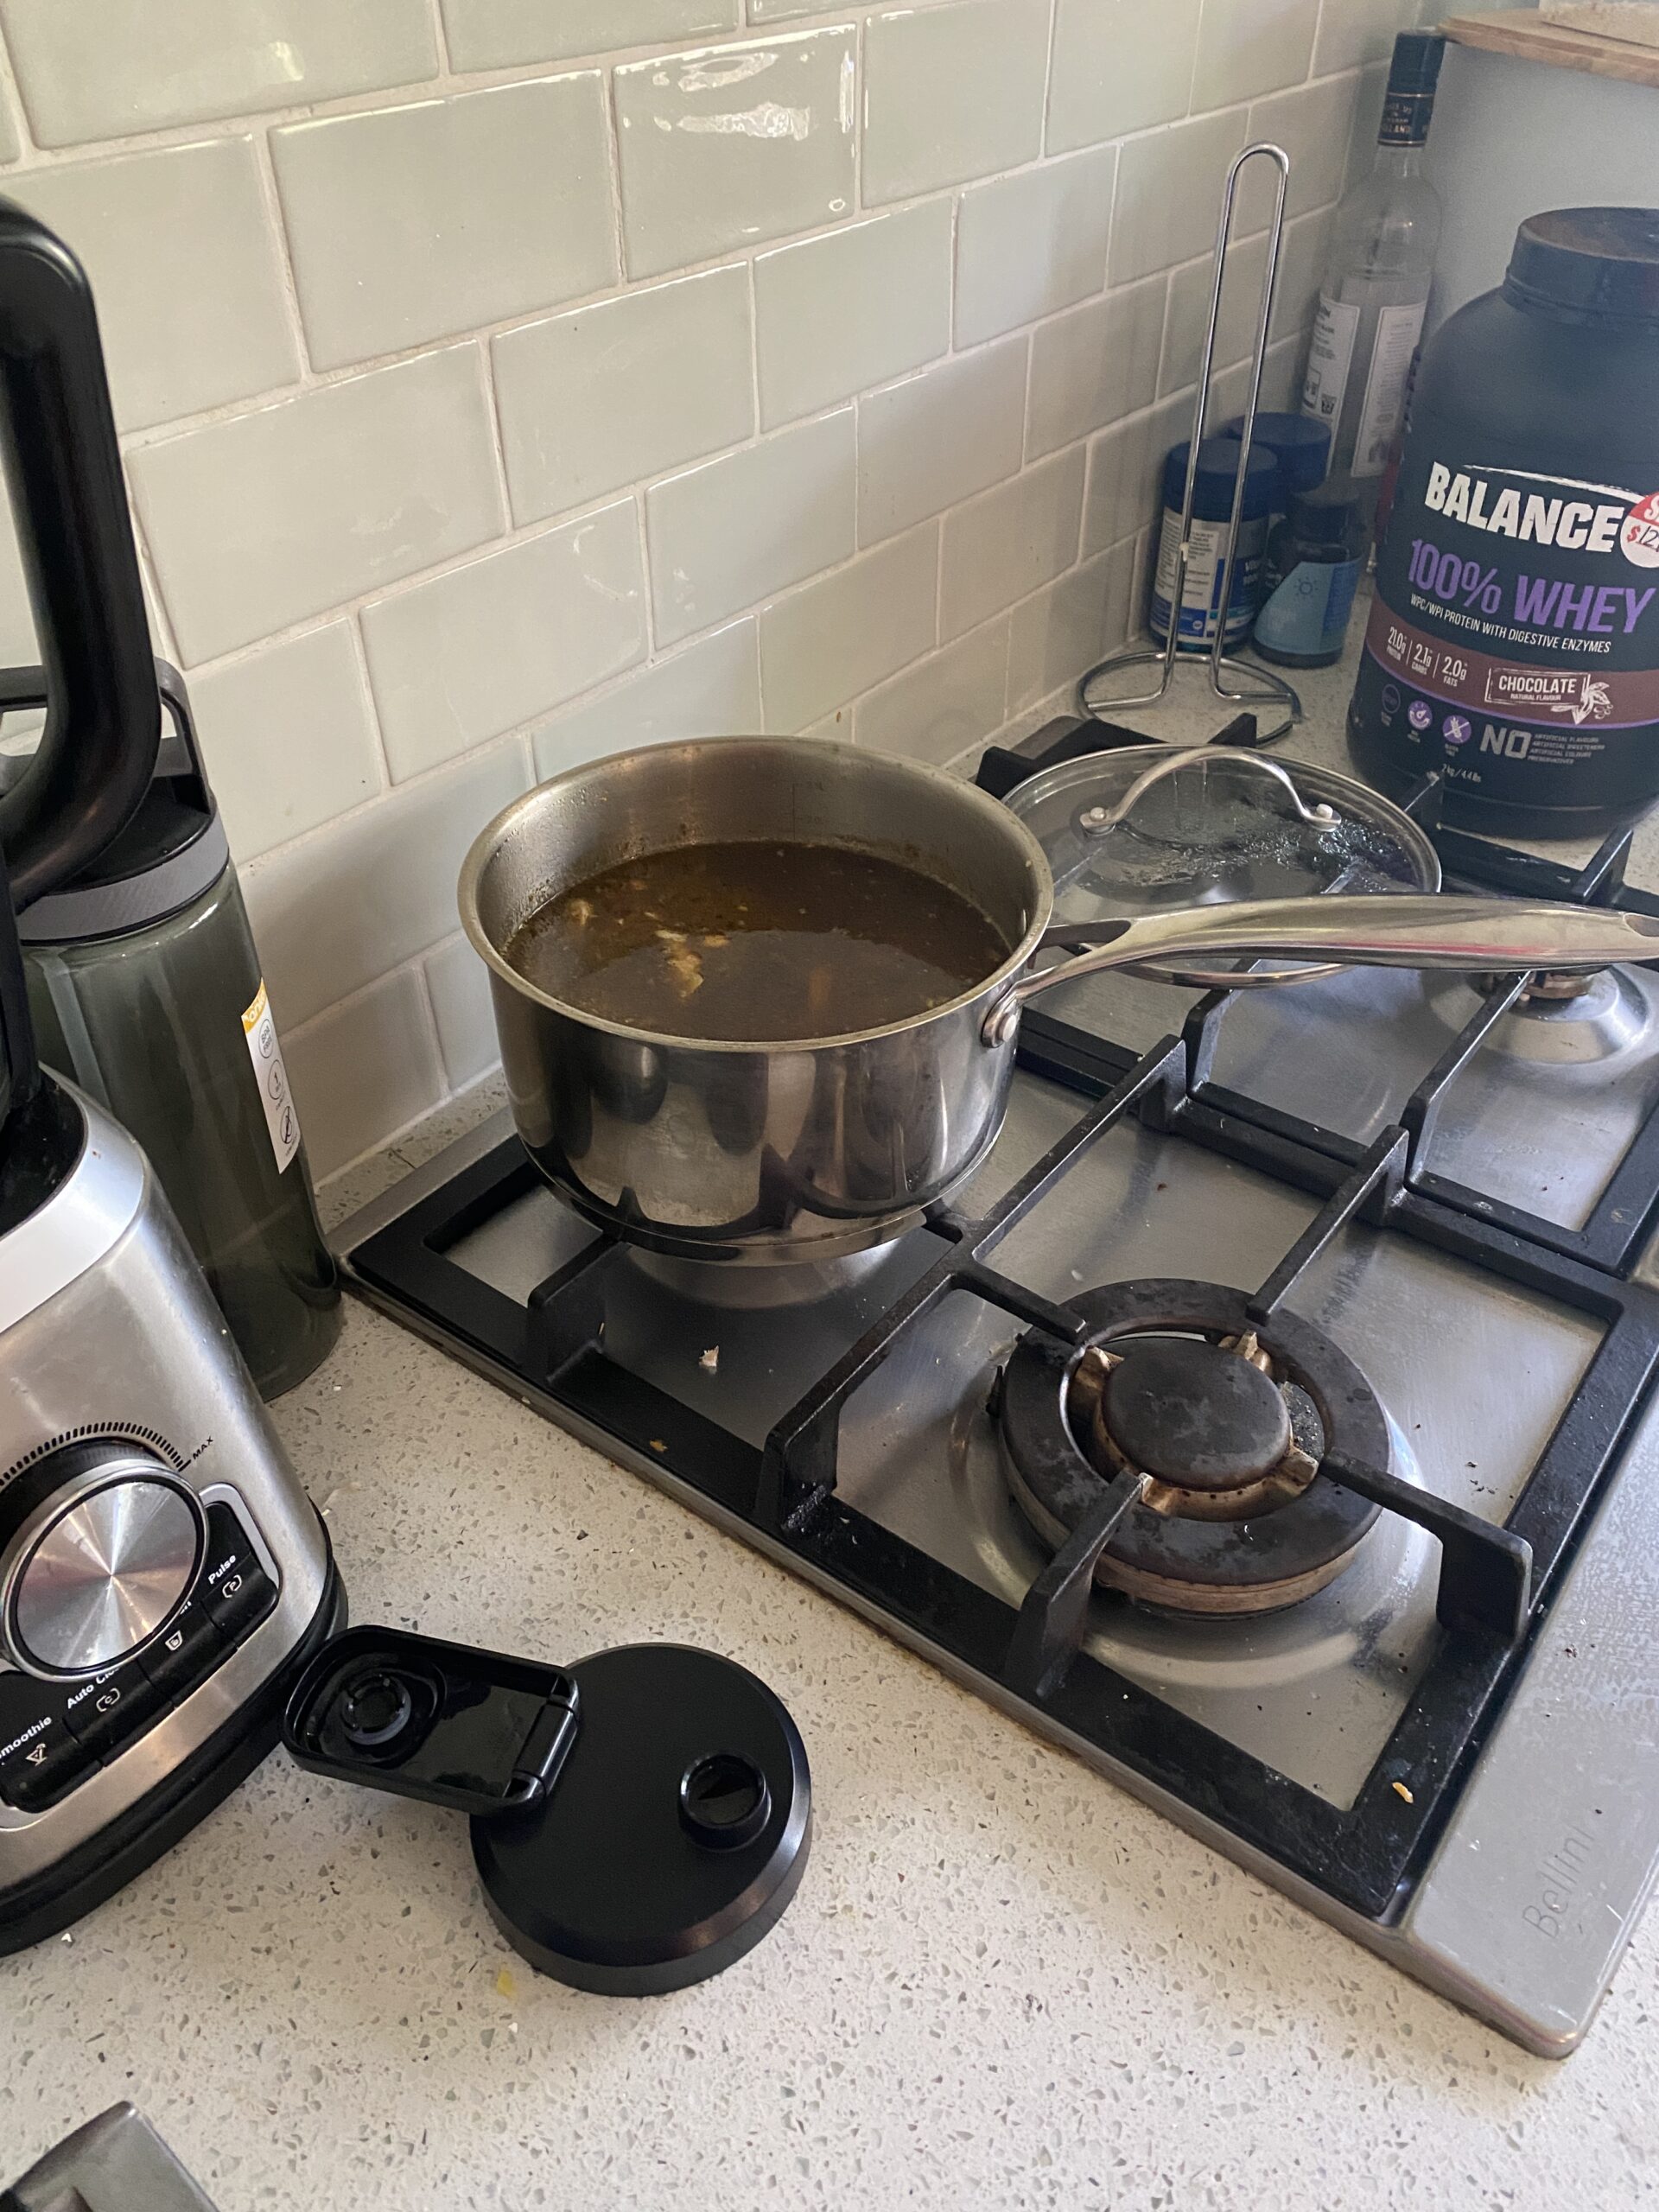 a stove with a pot of chicken broth and soup top - there are gas burners on the left of the image, which are turned OFF, there is also a top lid of a protein shaker on the far left